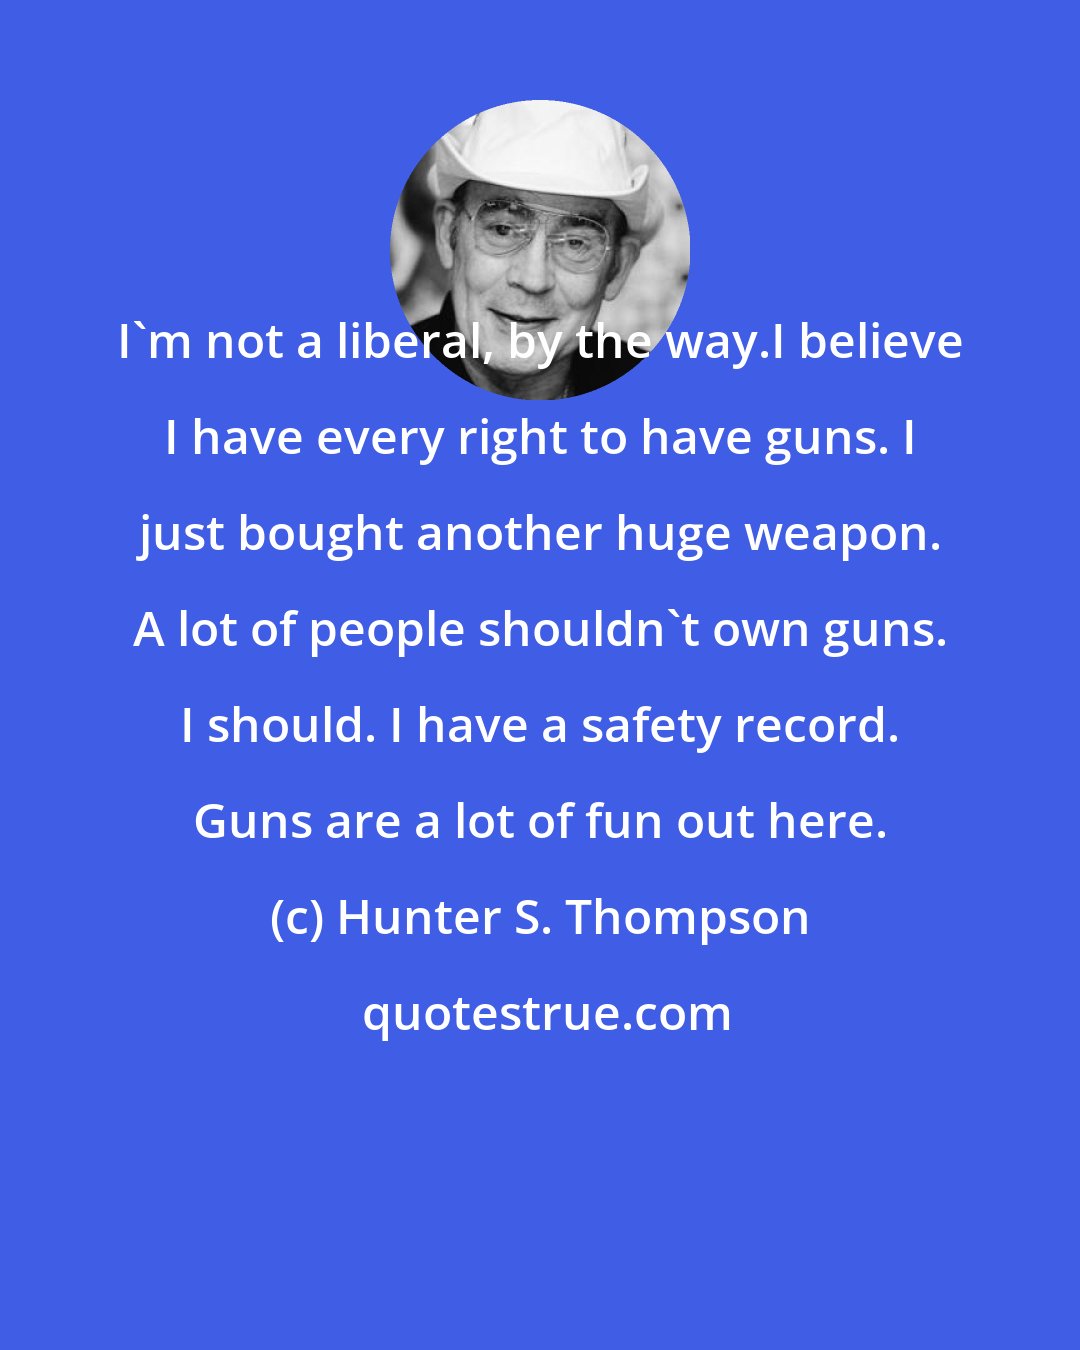 Hunter S. Thompson: I'm not a liberal, by the way.I believe I have every right to have guns. I just bought another huge weapon. A lot of people shouldn't own guns. I should. I have a safety record. Guns are a lot of fun out here.